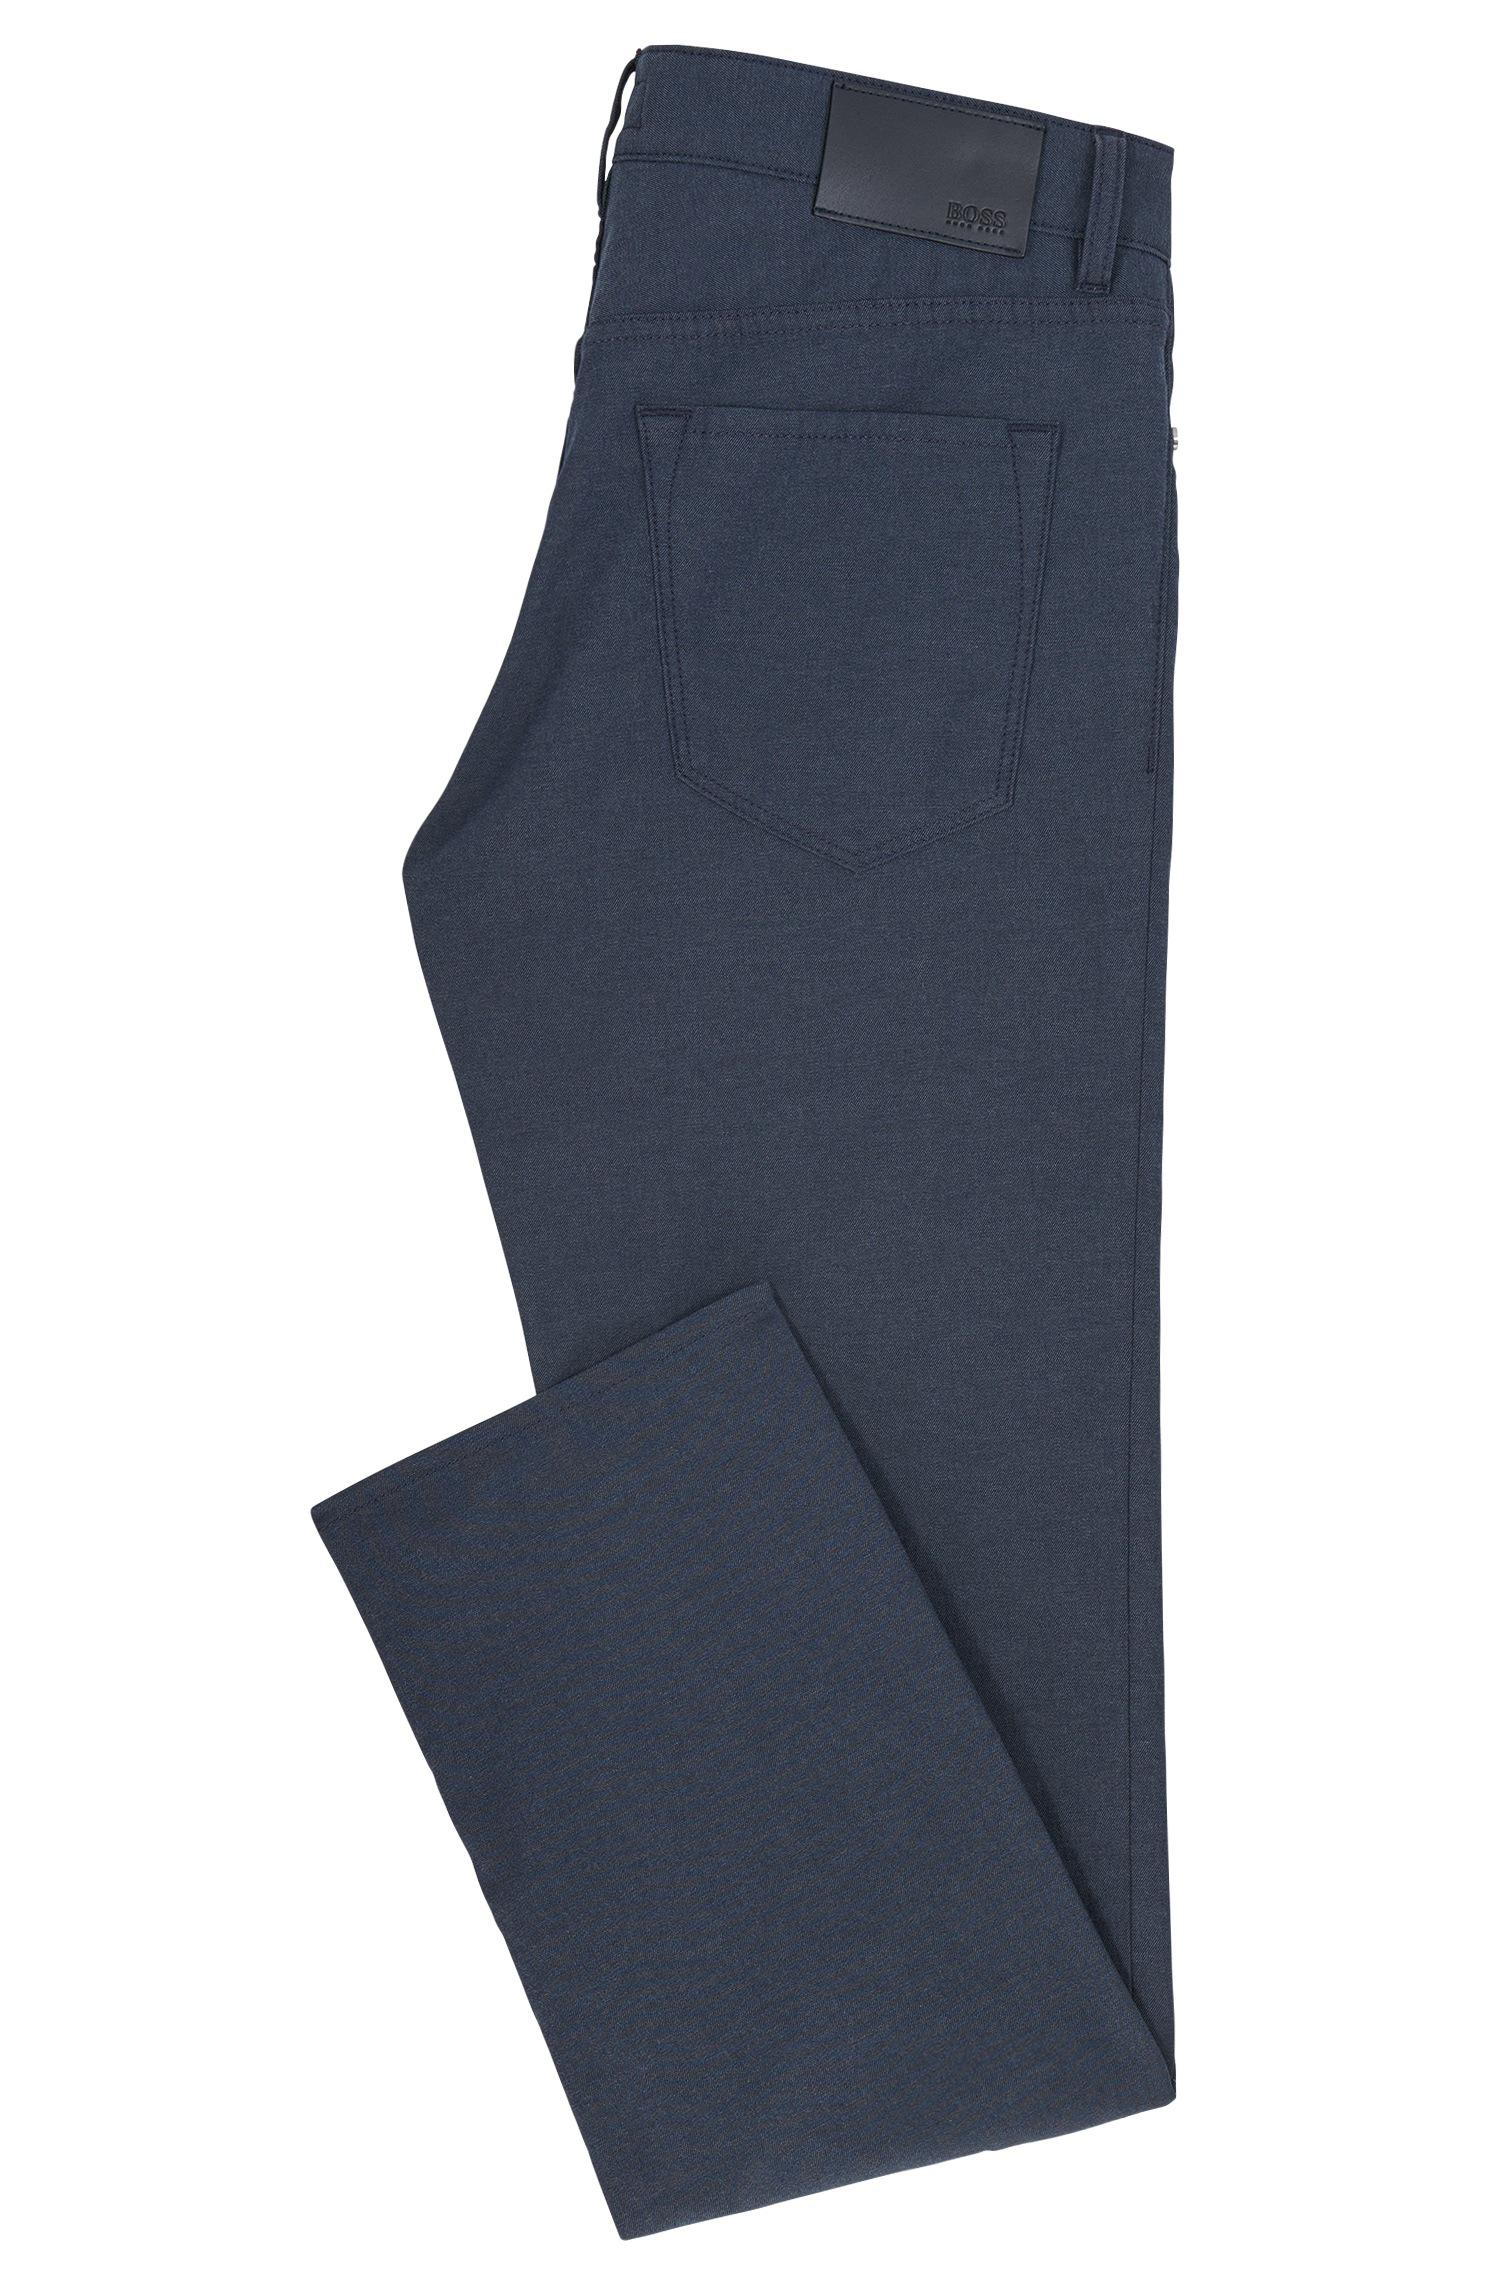 BOSS by HUGO BOSS Stretch Cotton Pant, Regular Fit | Maine in Dark Blue  (Blue) for Men - Lyst